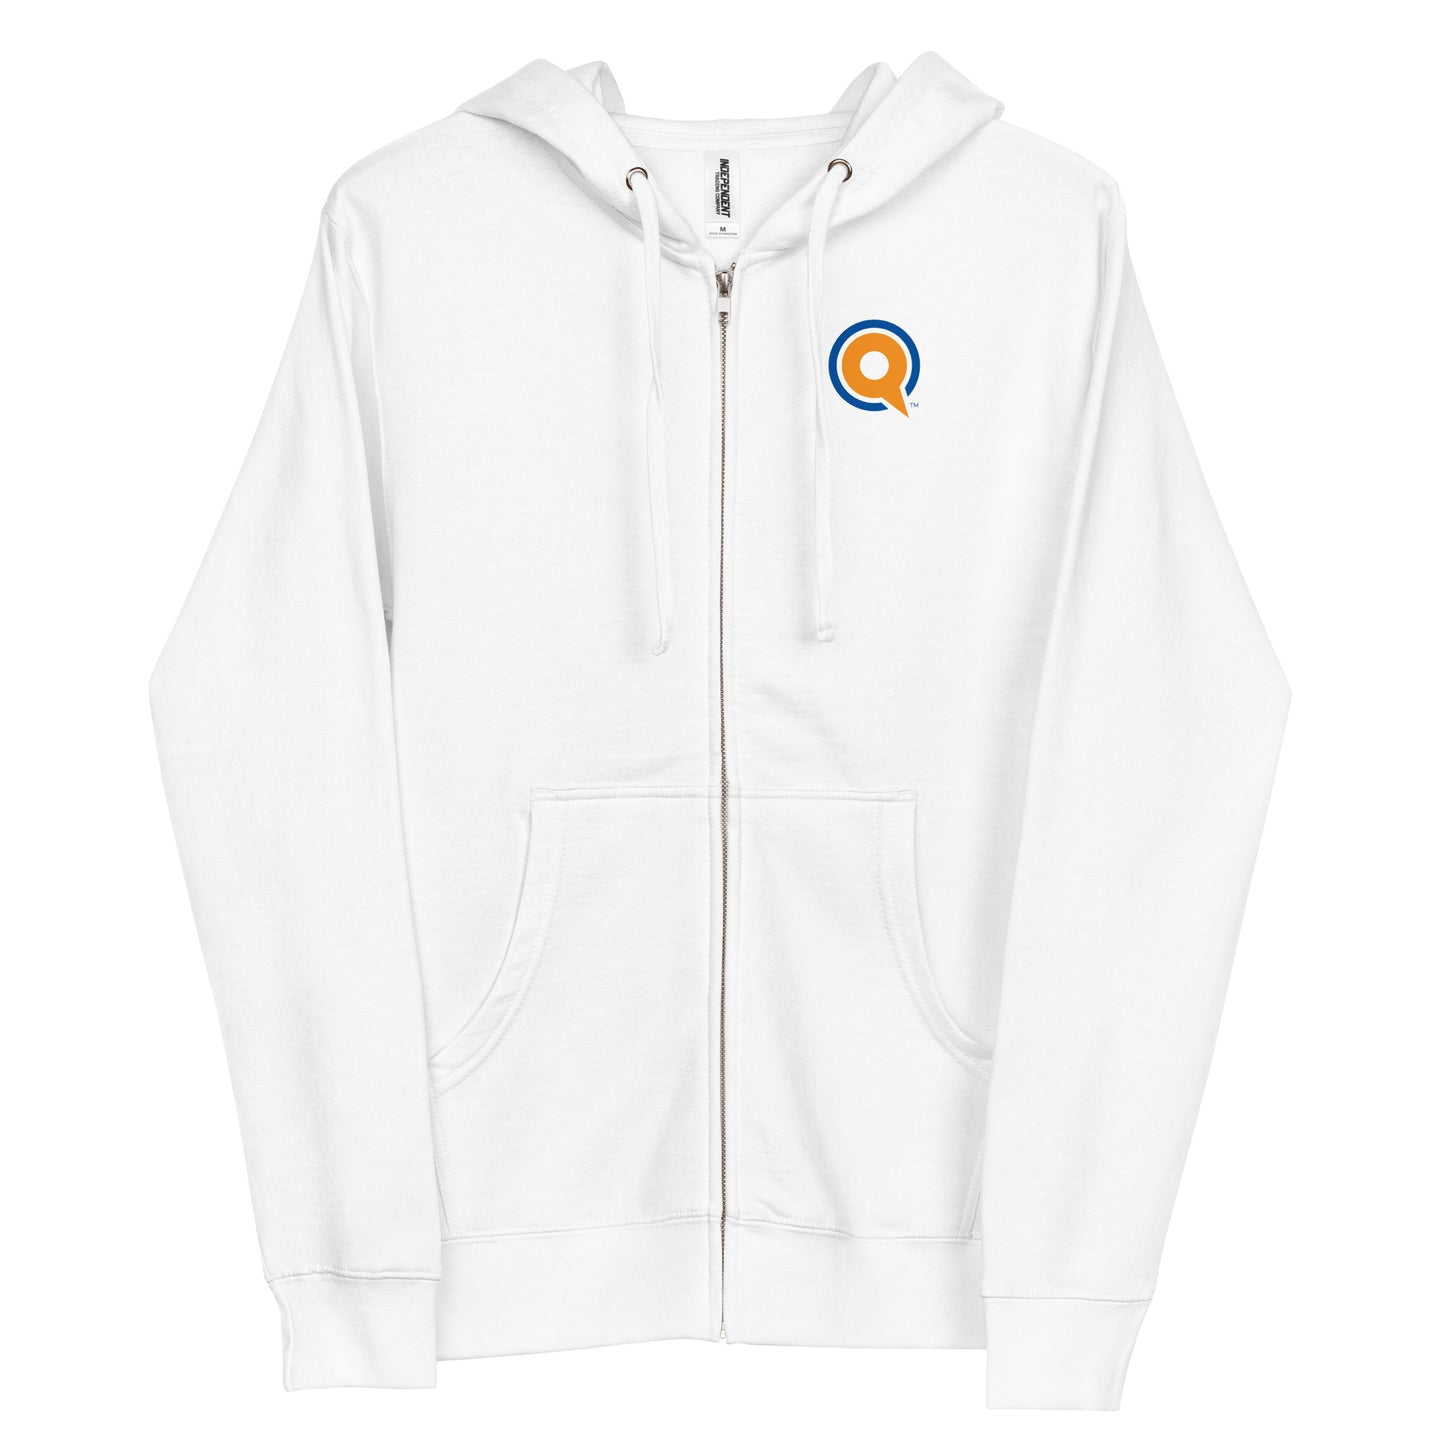 Yaqeen Q Zip-Up Hoodie in White